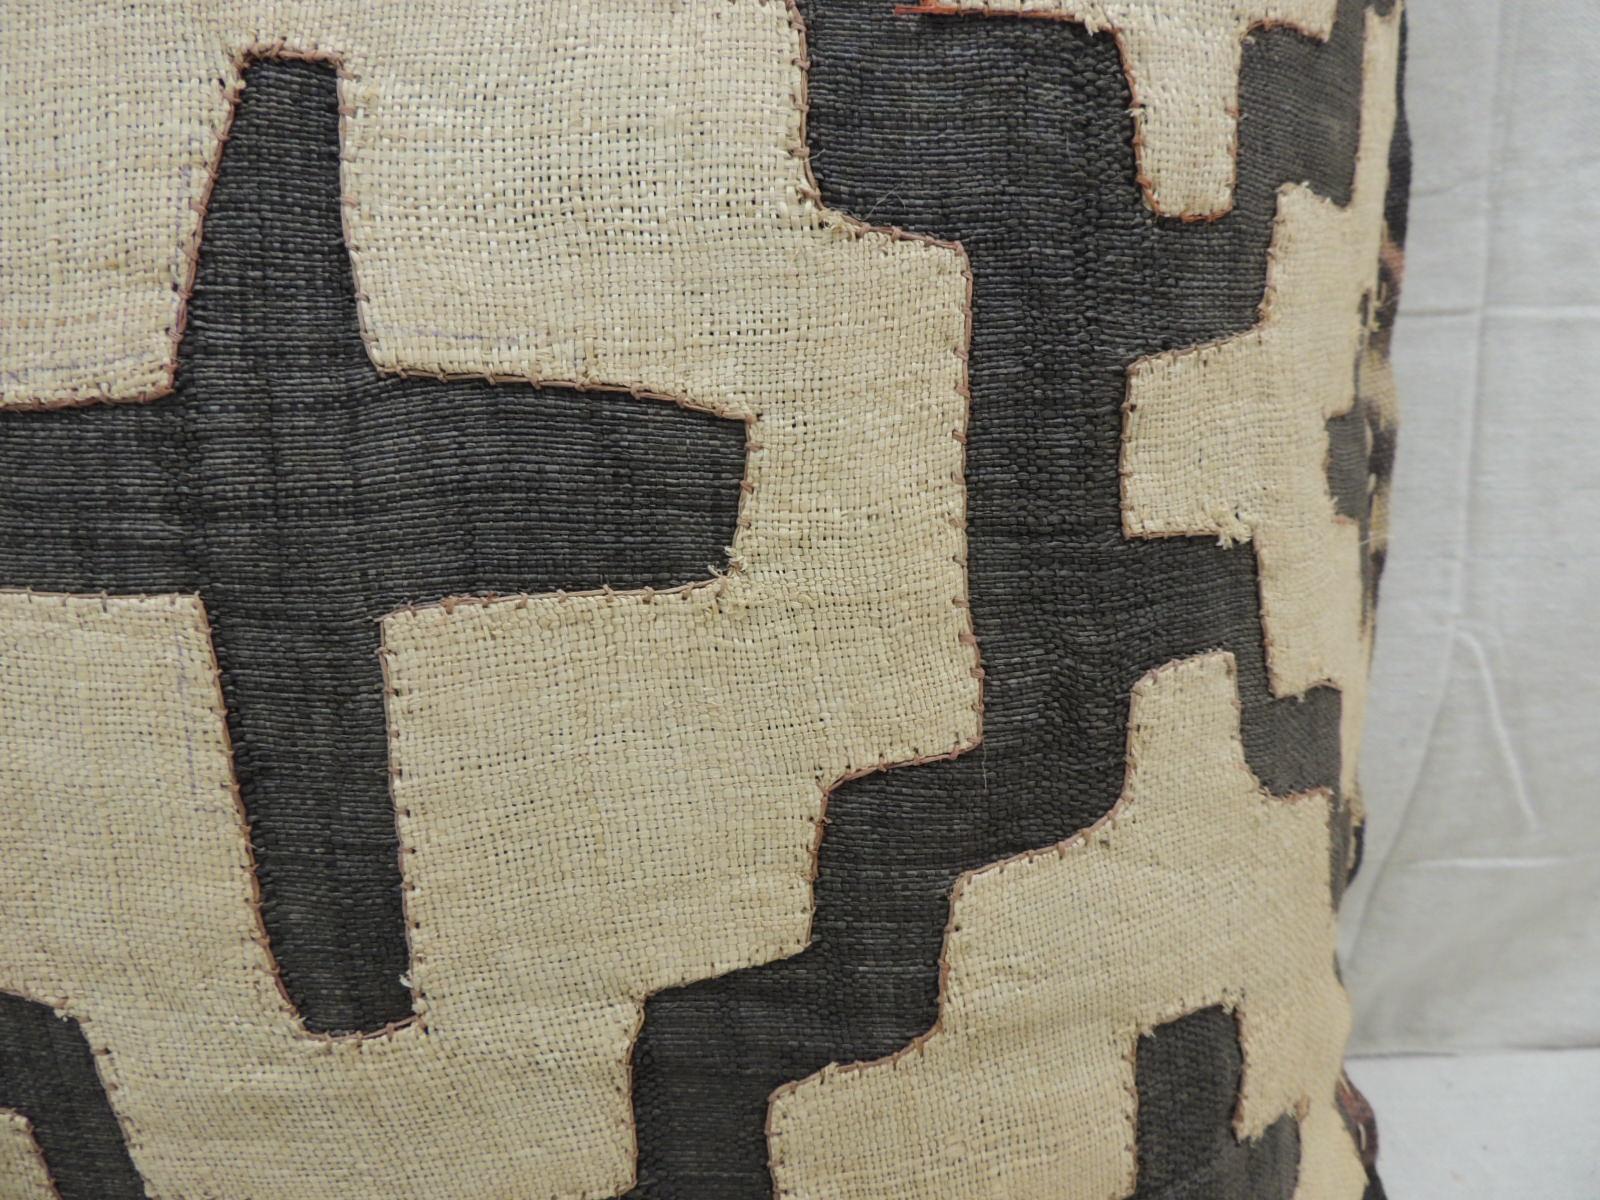 Hand-Crafted Vintage Kuba Tan and Black Handwoven Patchwork African Decorative Pillow